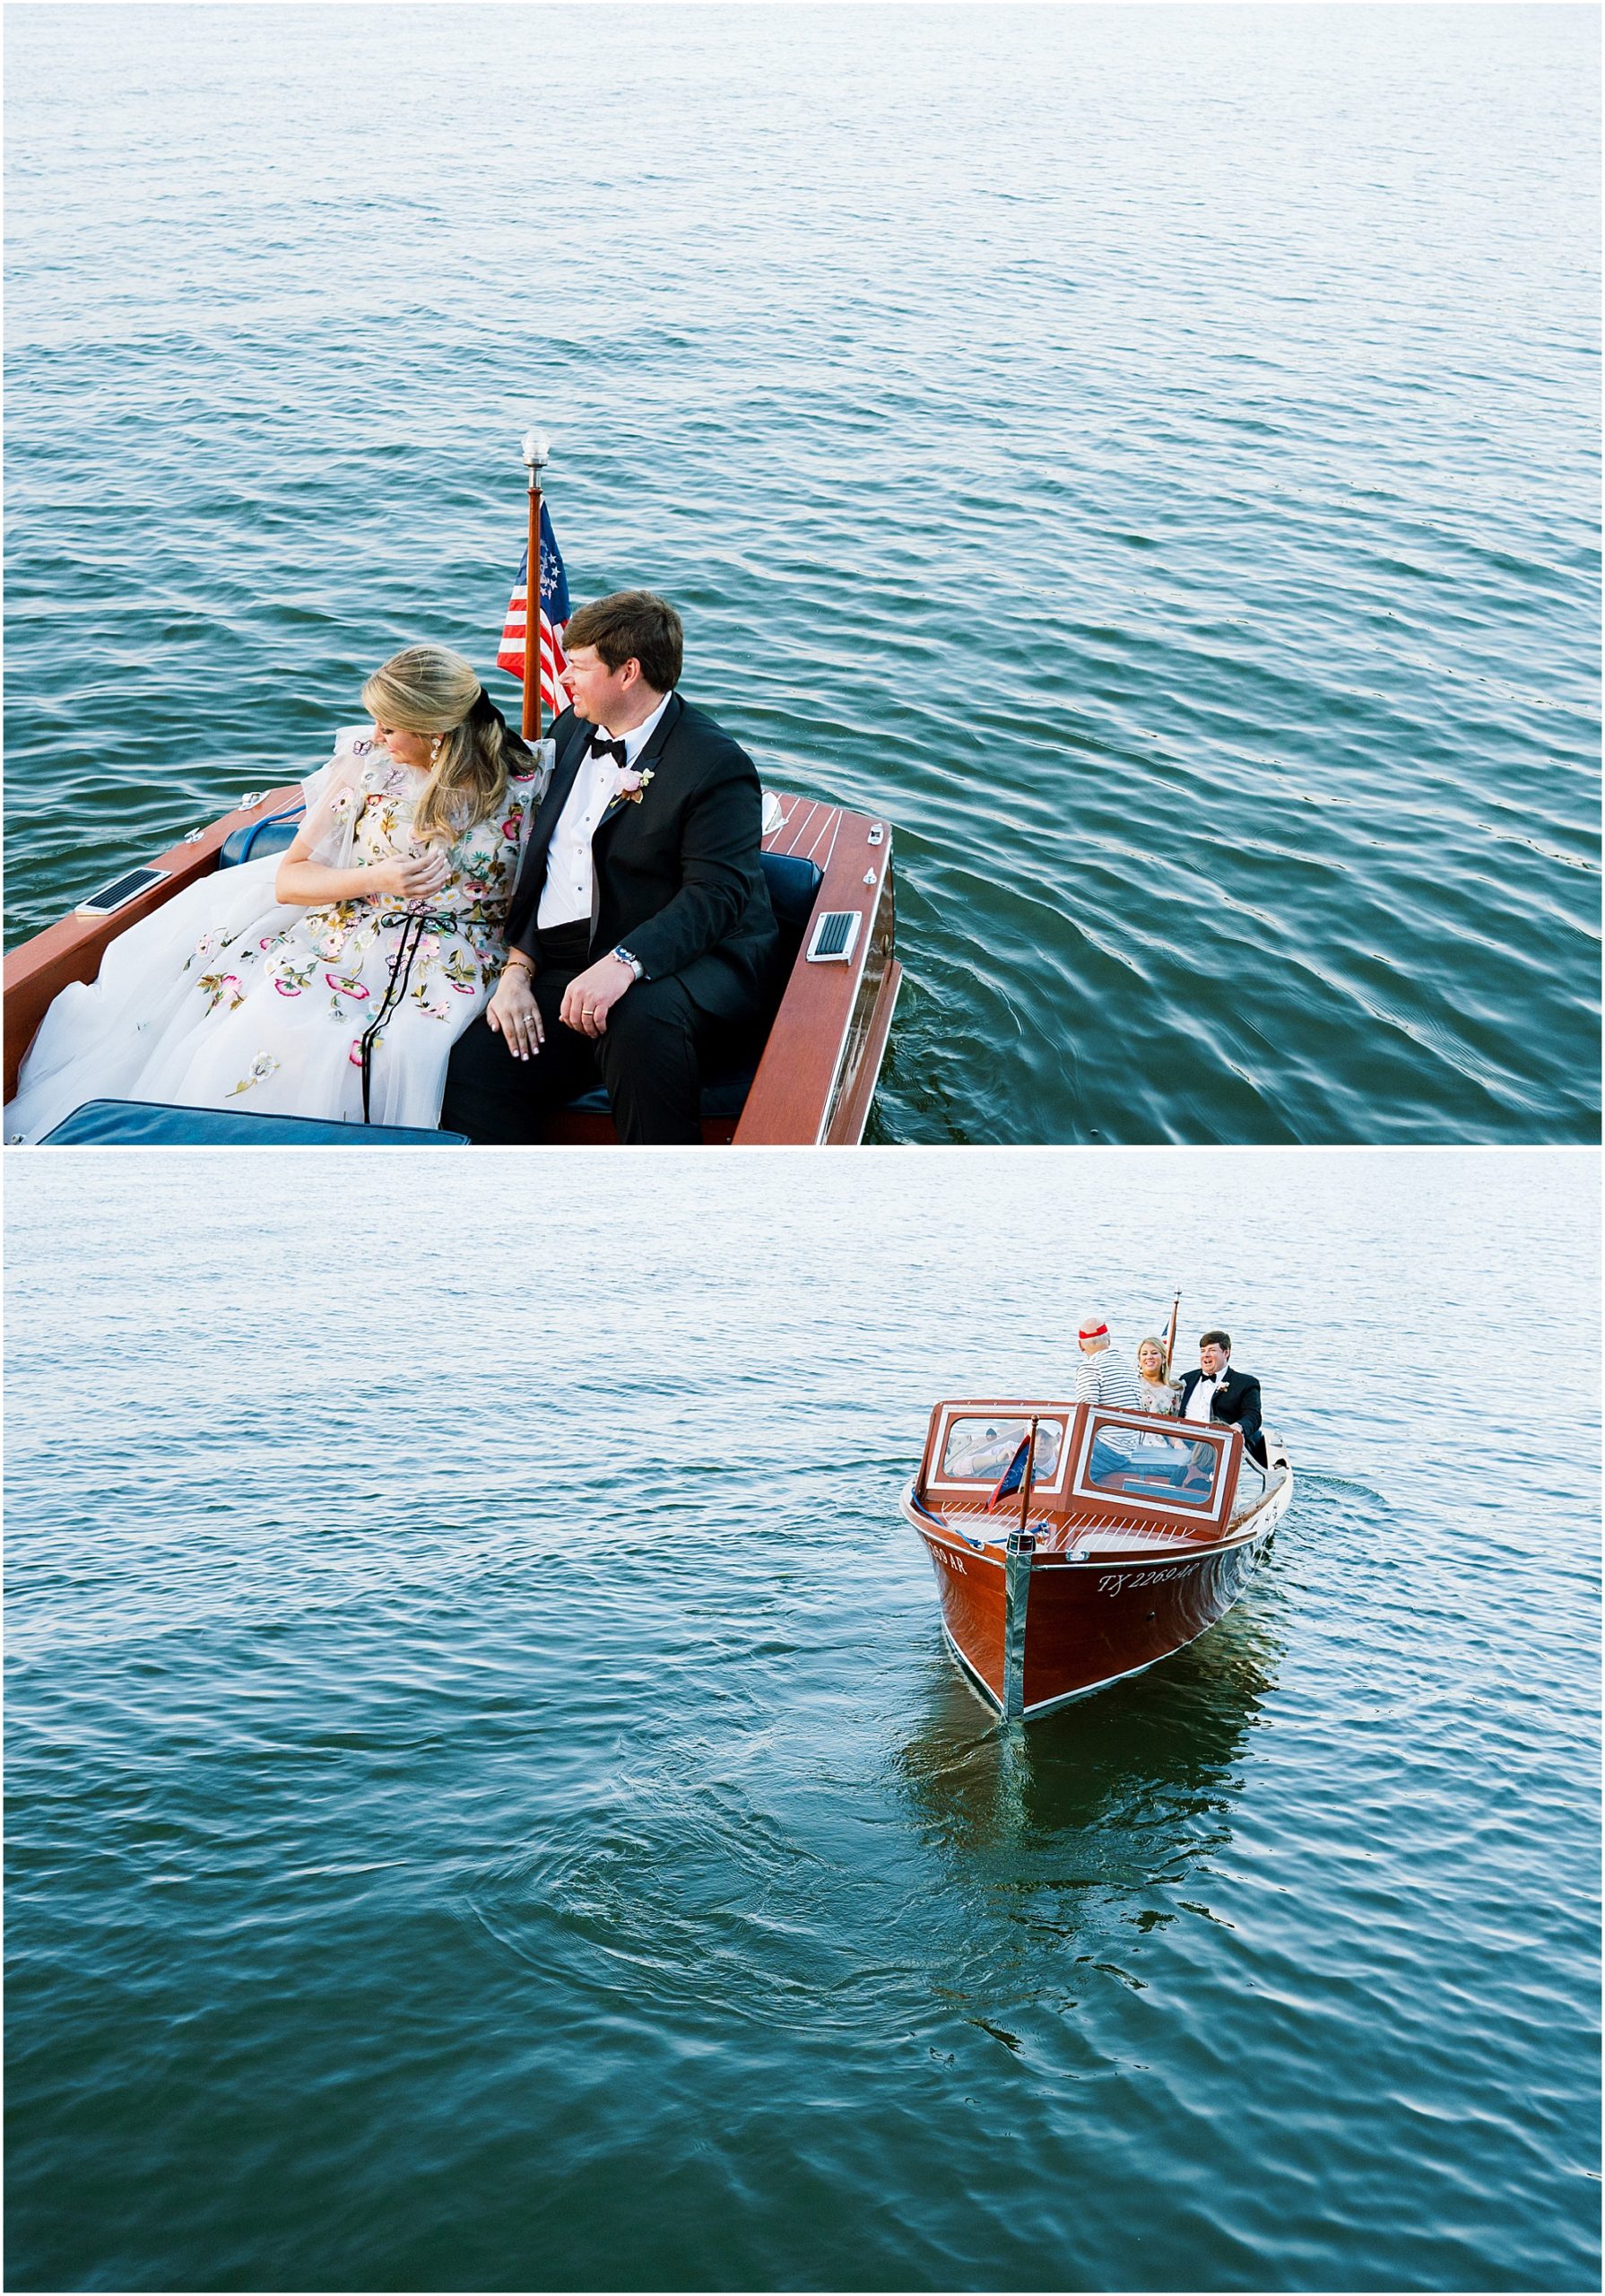 Bride in Monique Lhuillier with groom wearing a black tux on the lake riding a boat to their wedding reception at Horse Shoe Bay Resort